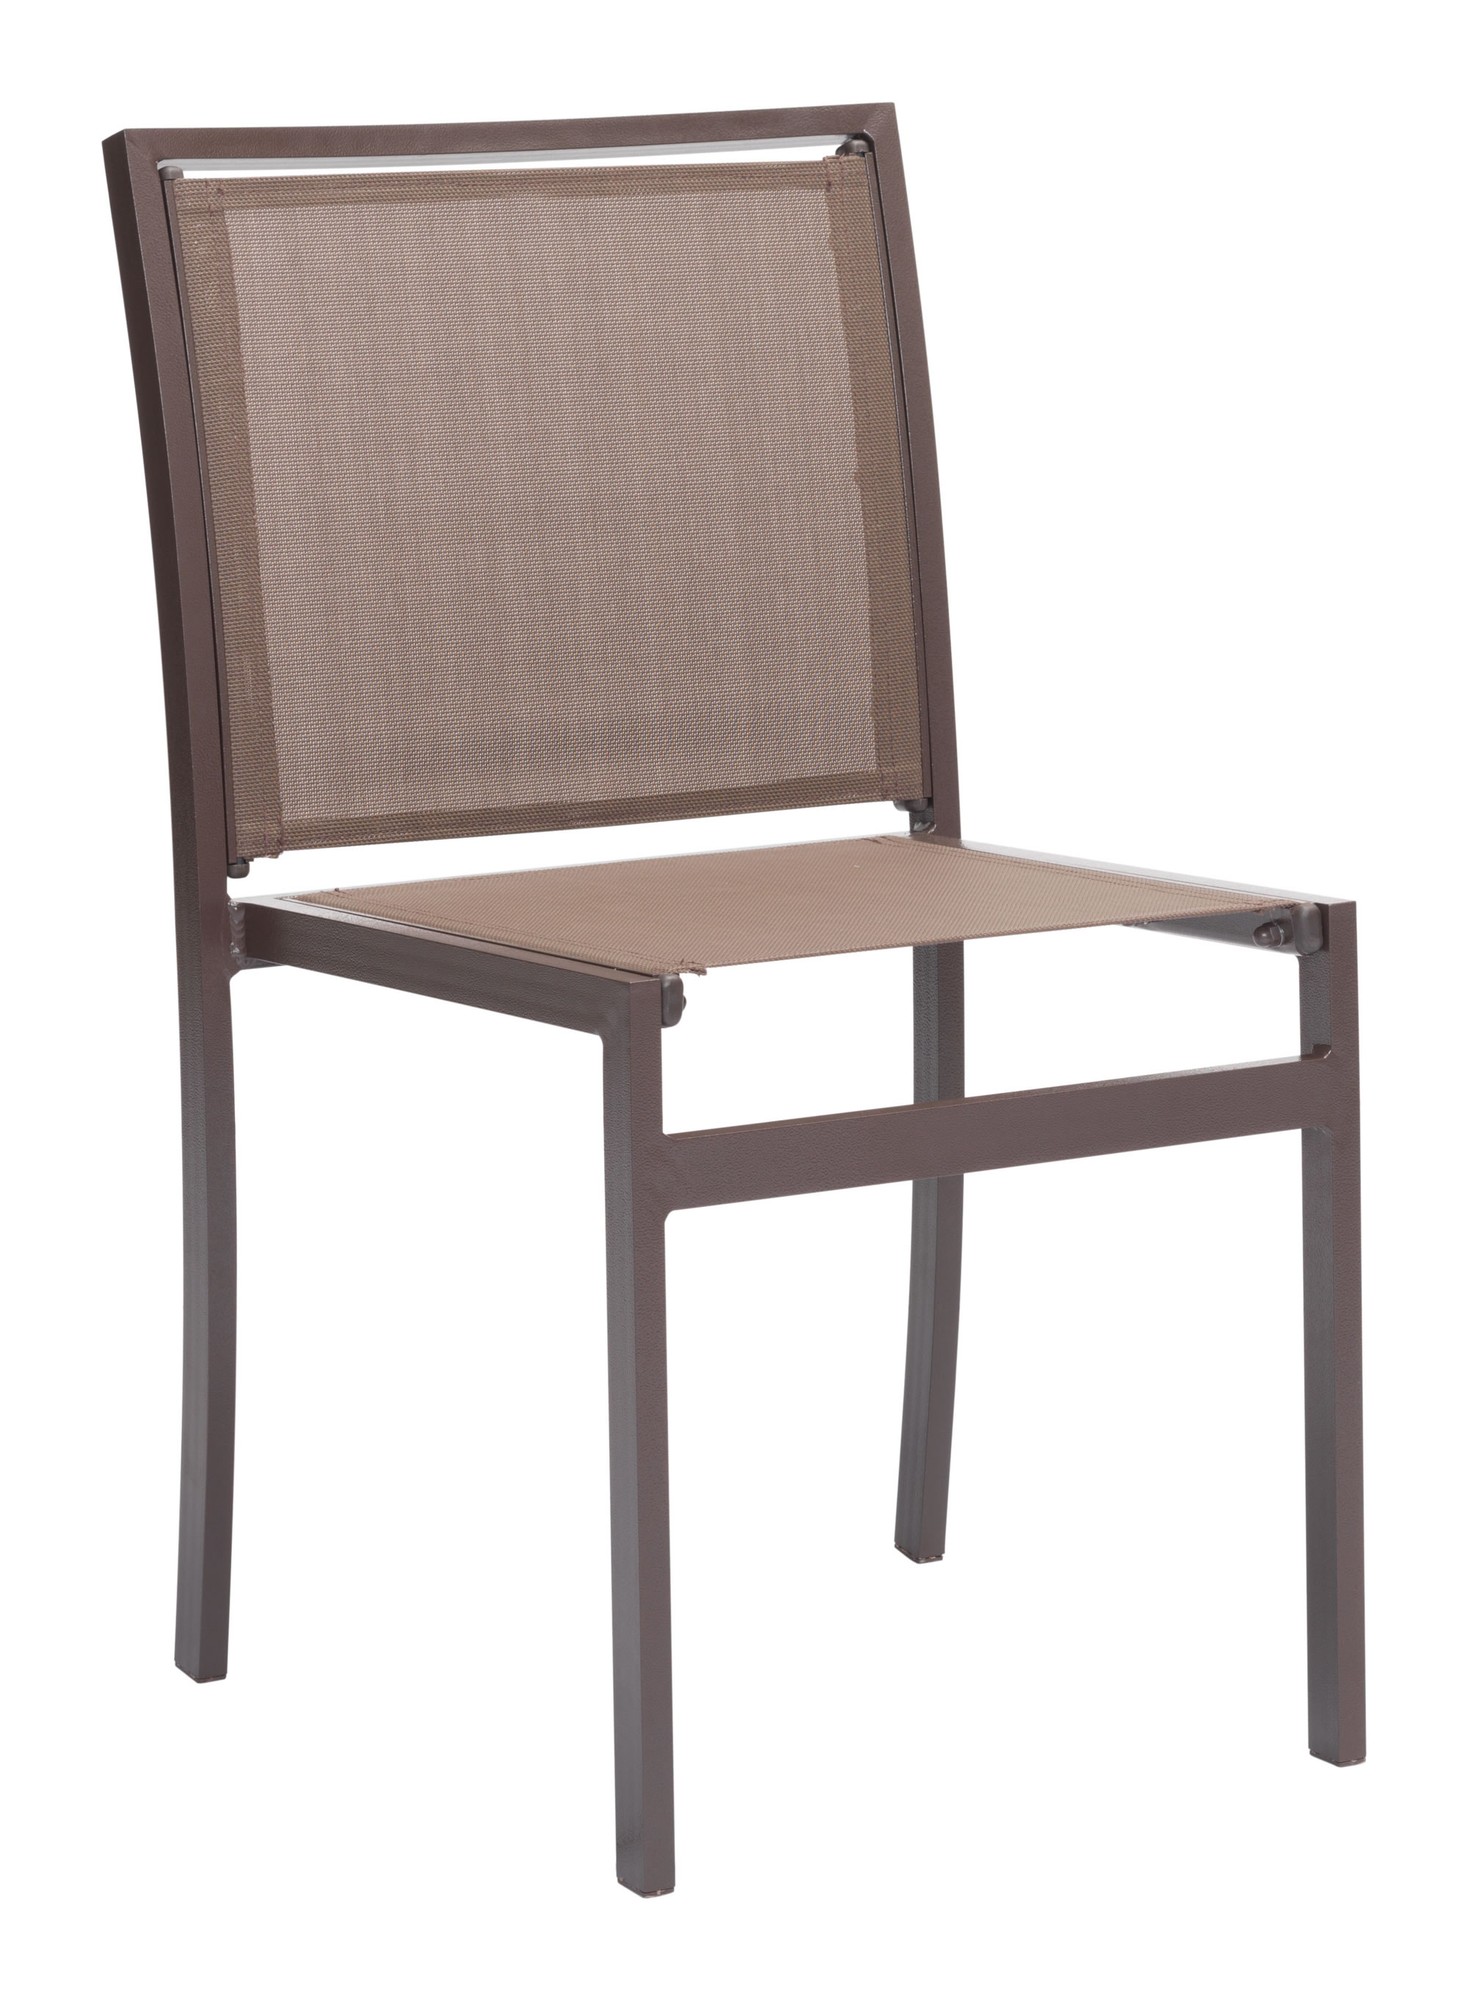 19" x 23.5" x 33.5" Brown, Mesh, Powder Coated Aluminum, Dining Chair - Set of 2